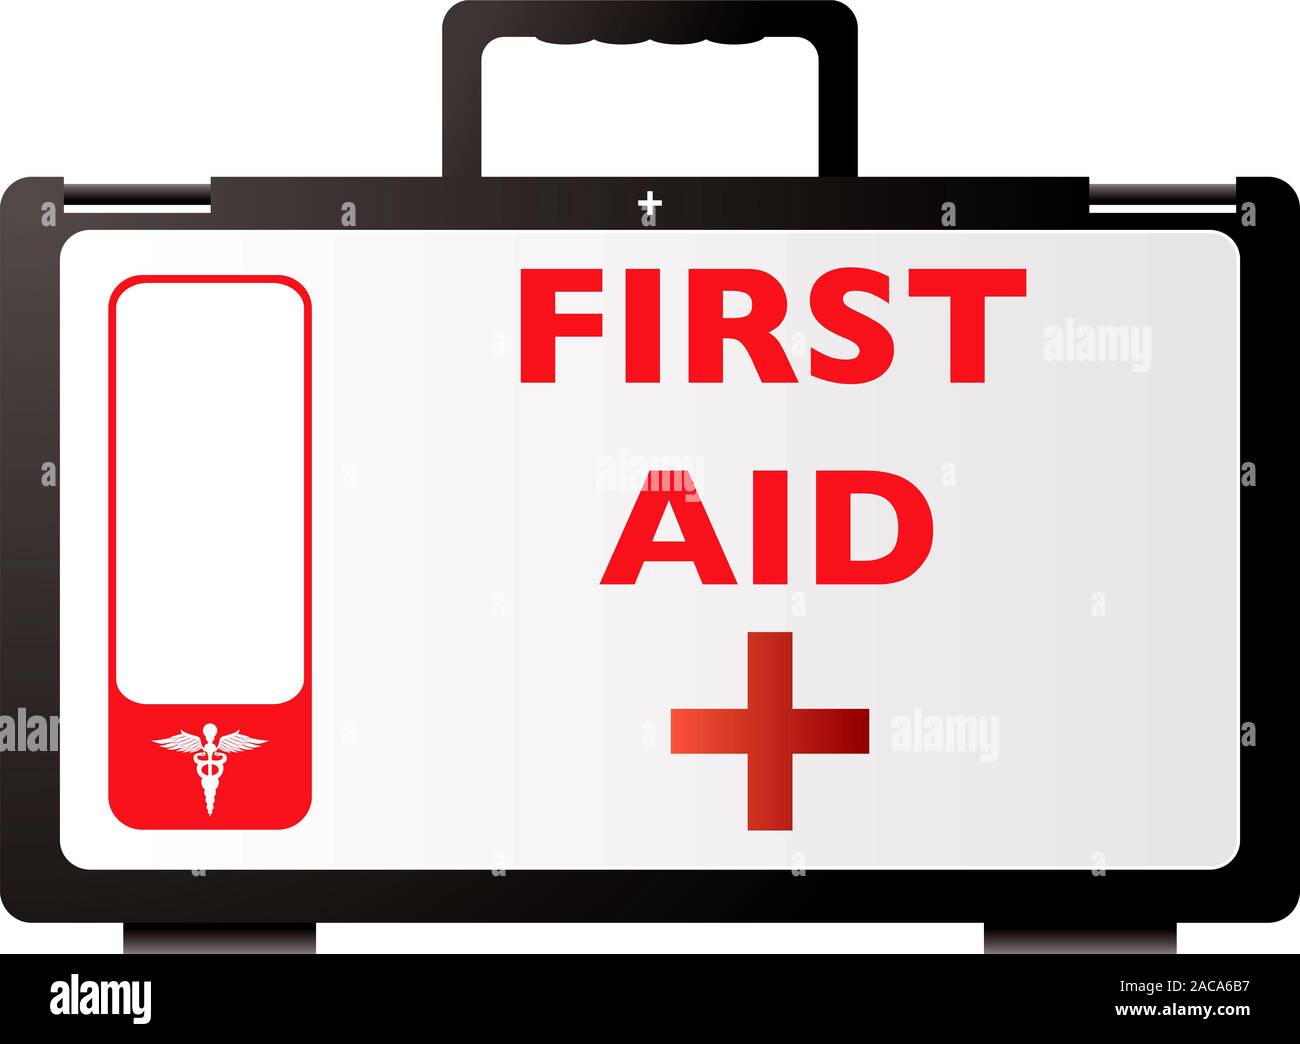 first aid red Stock Photo